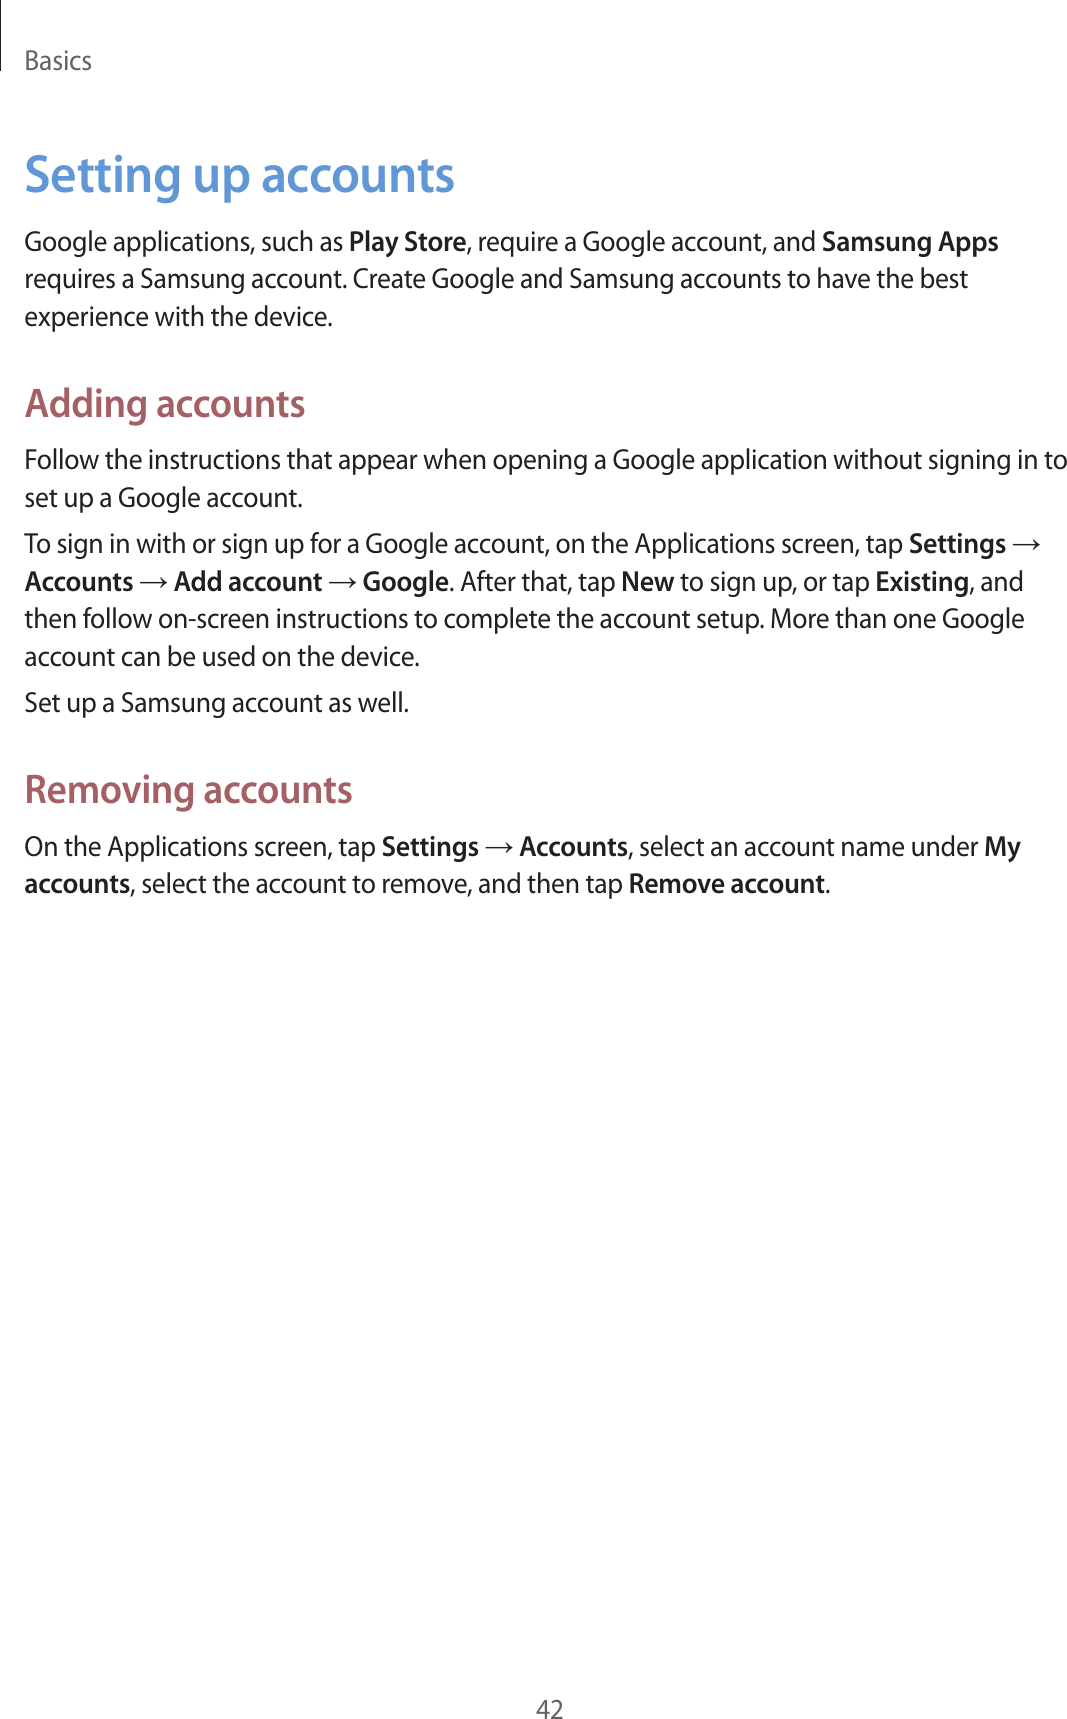 Basics42Setting up accountsGoogle applications, such as Play Store, require a Google account, and Samsung Apps requires a Samsung account. Create Google and Samsung accounts to have the best experience with the device.Adding accountsFollow the instructions that appear when opening a Google application without signing in to set up a Google account.To sign in with or sign up for a Google account, on the Applications screen, tap Settings → Accounts → Add account → Google. After that, tap New to sign up, or tap Existing, and then follow on-screen instructions to complete the account setup. More than one Google account can be used on the device.Set up a Samsung account as well.Removing accountsOn the Applications screen, tap Settings → Accounts, select an account name under My accounts, select the account to remove, and then tap Remove account.